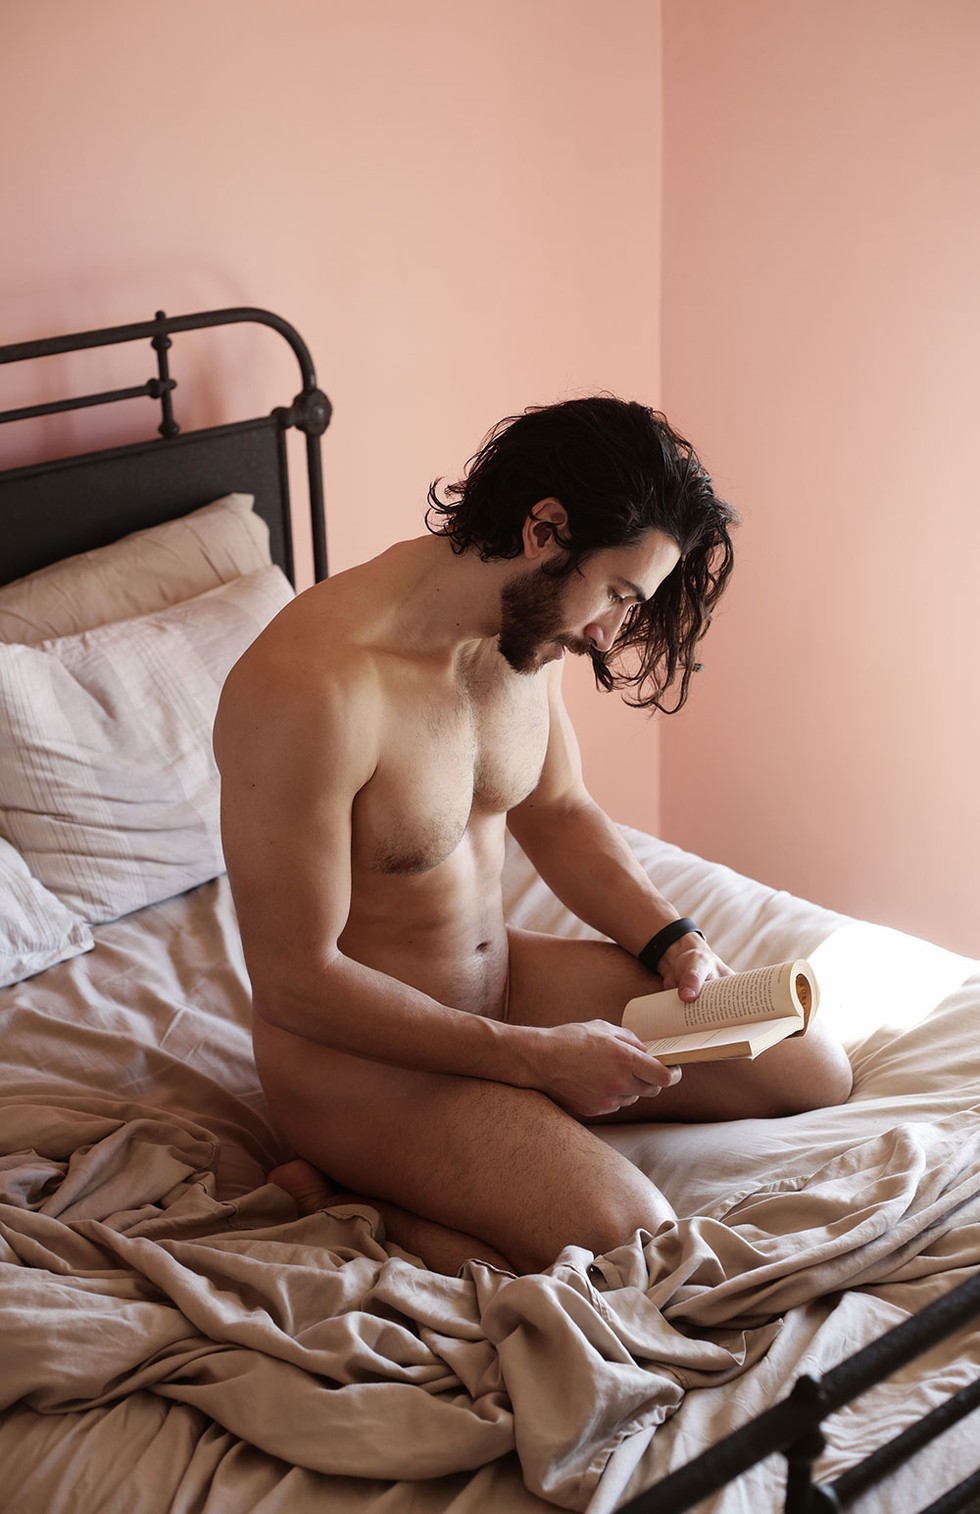 Peep this photo series of naked guys reading in bed.